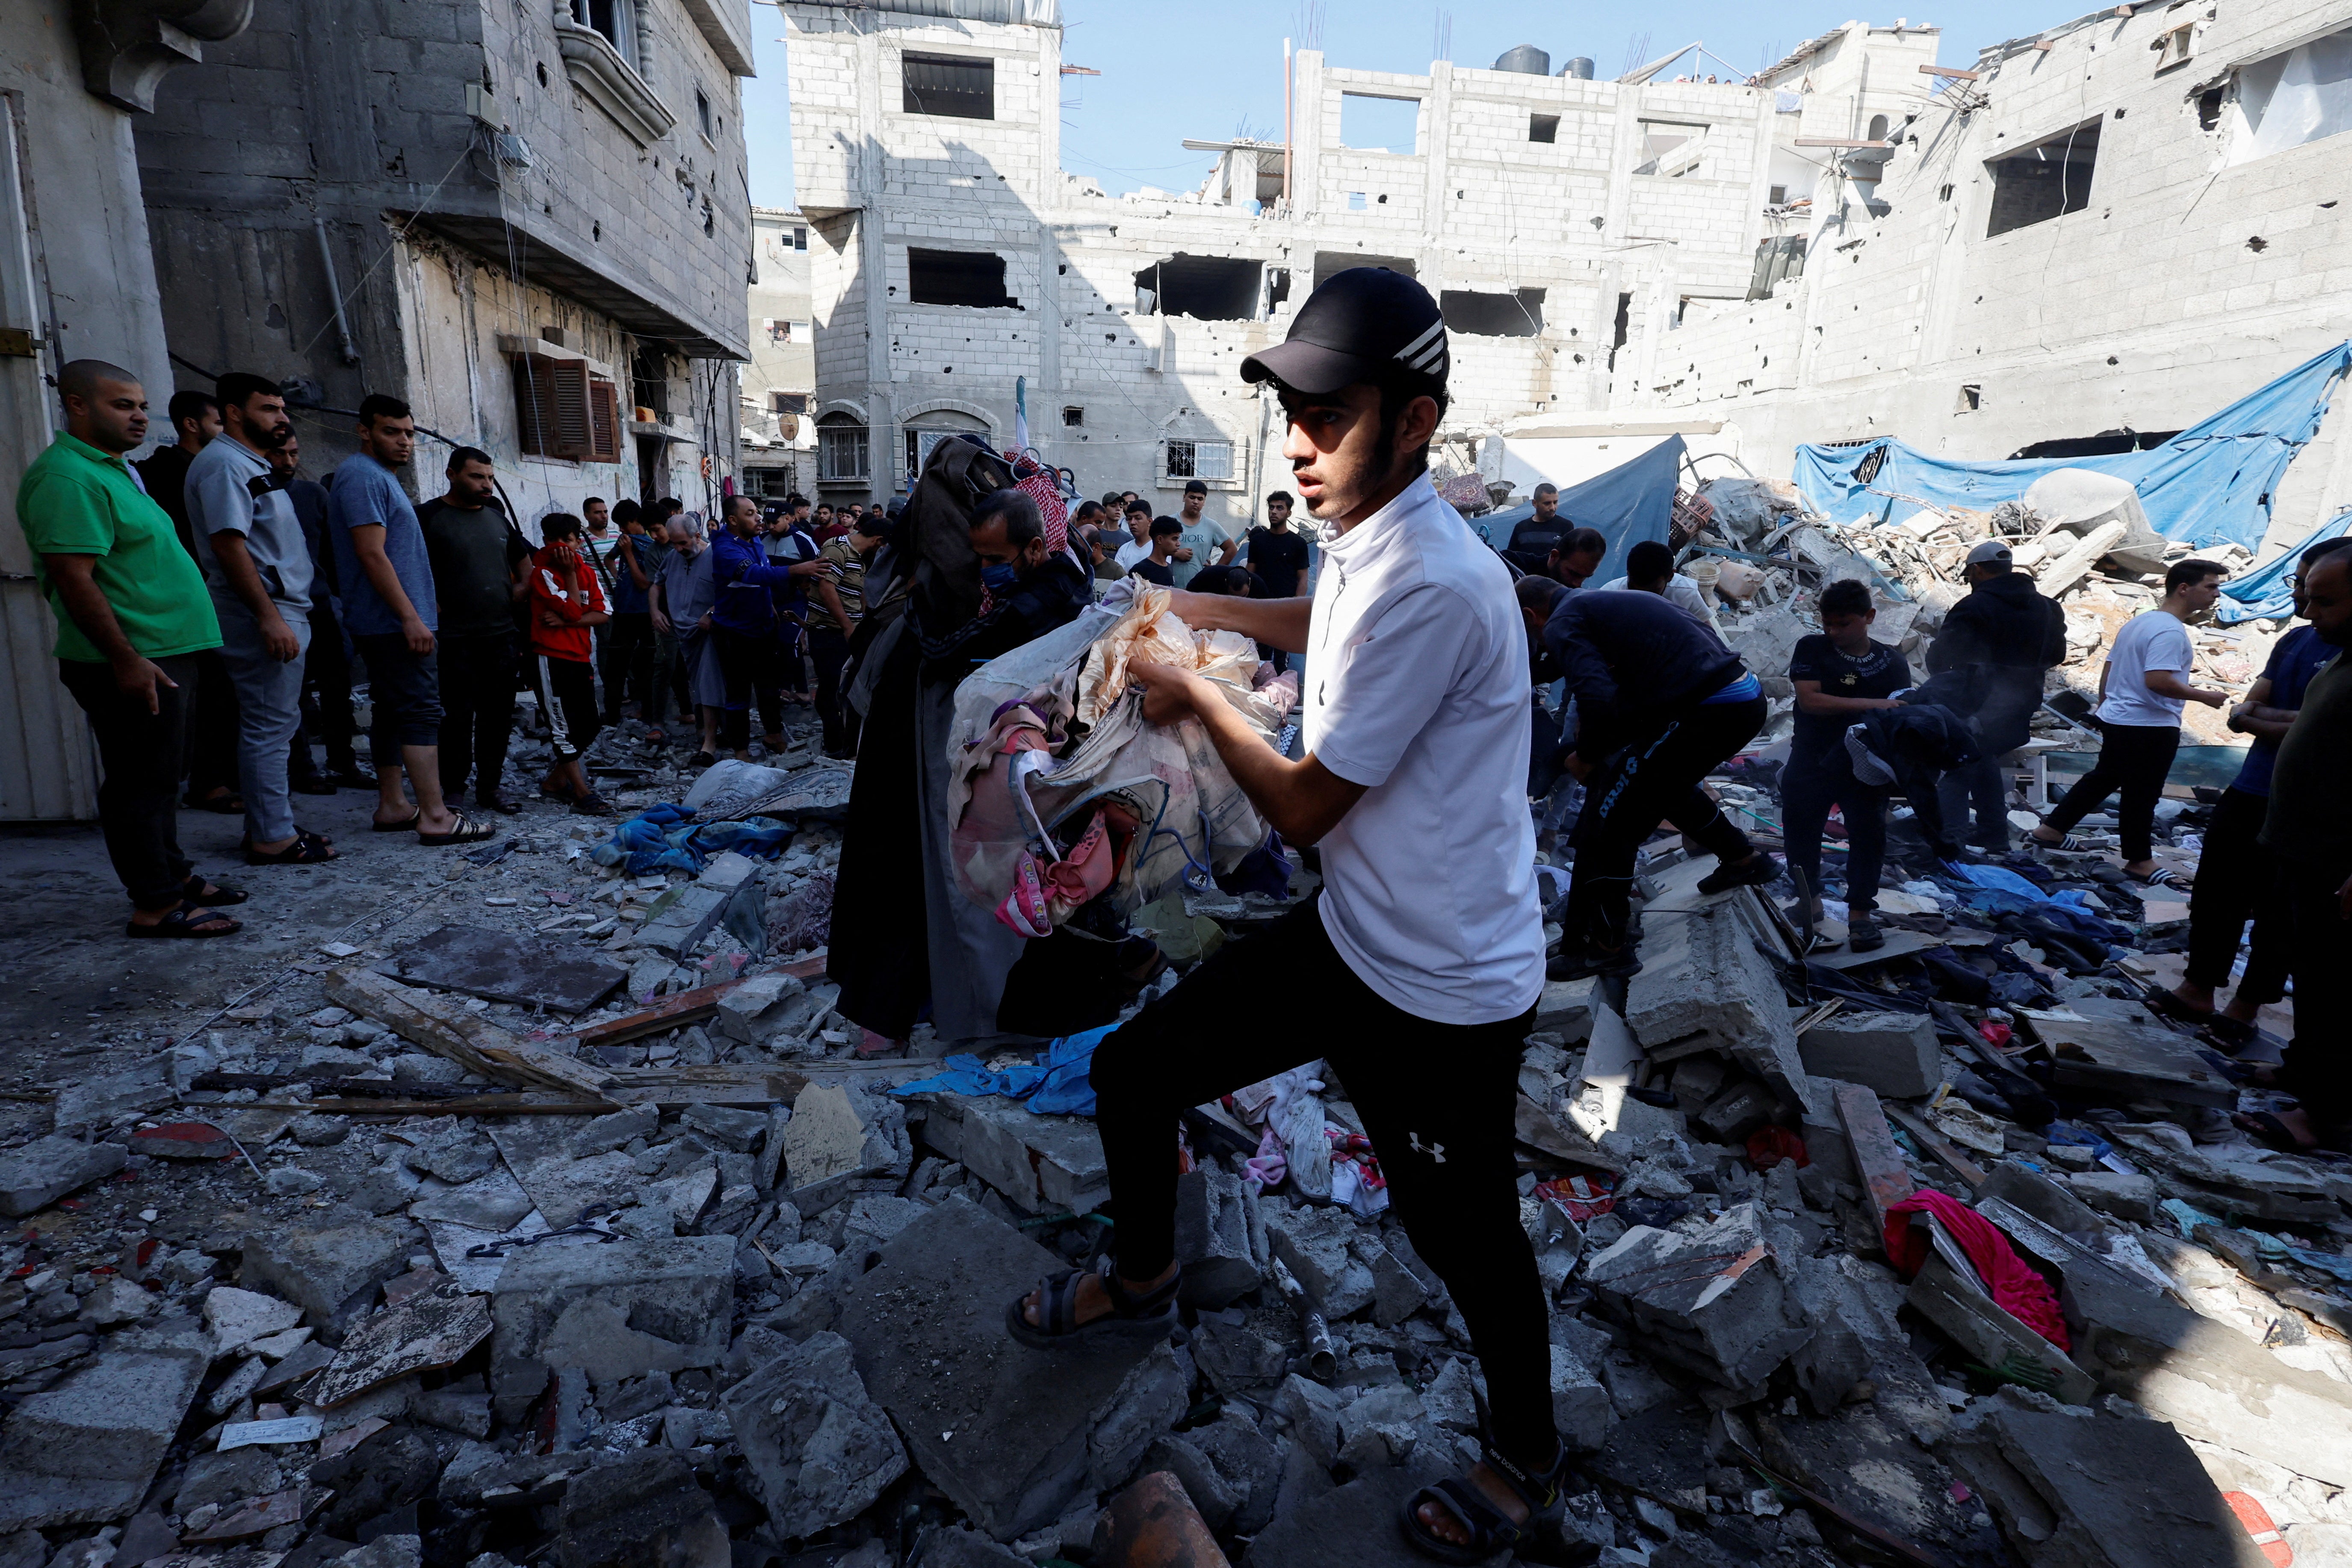 A Palestinian man carries objects as he walks through debris on 14 November in the aftermath of an Israeli strike in Gaza